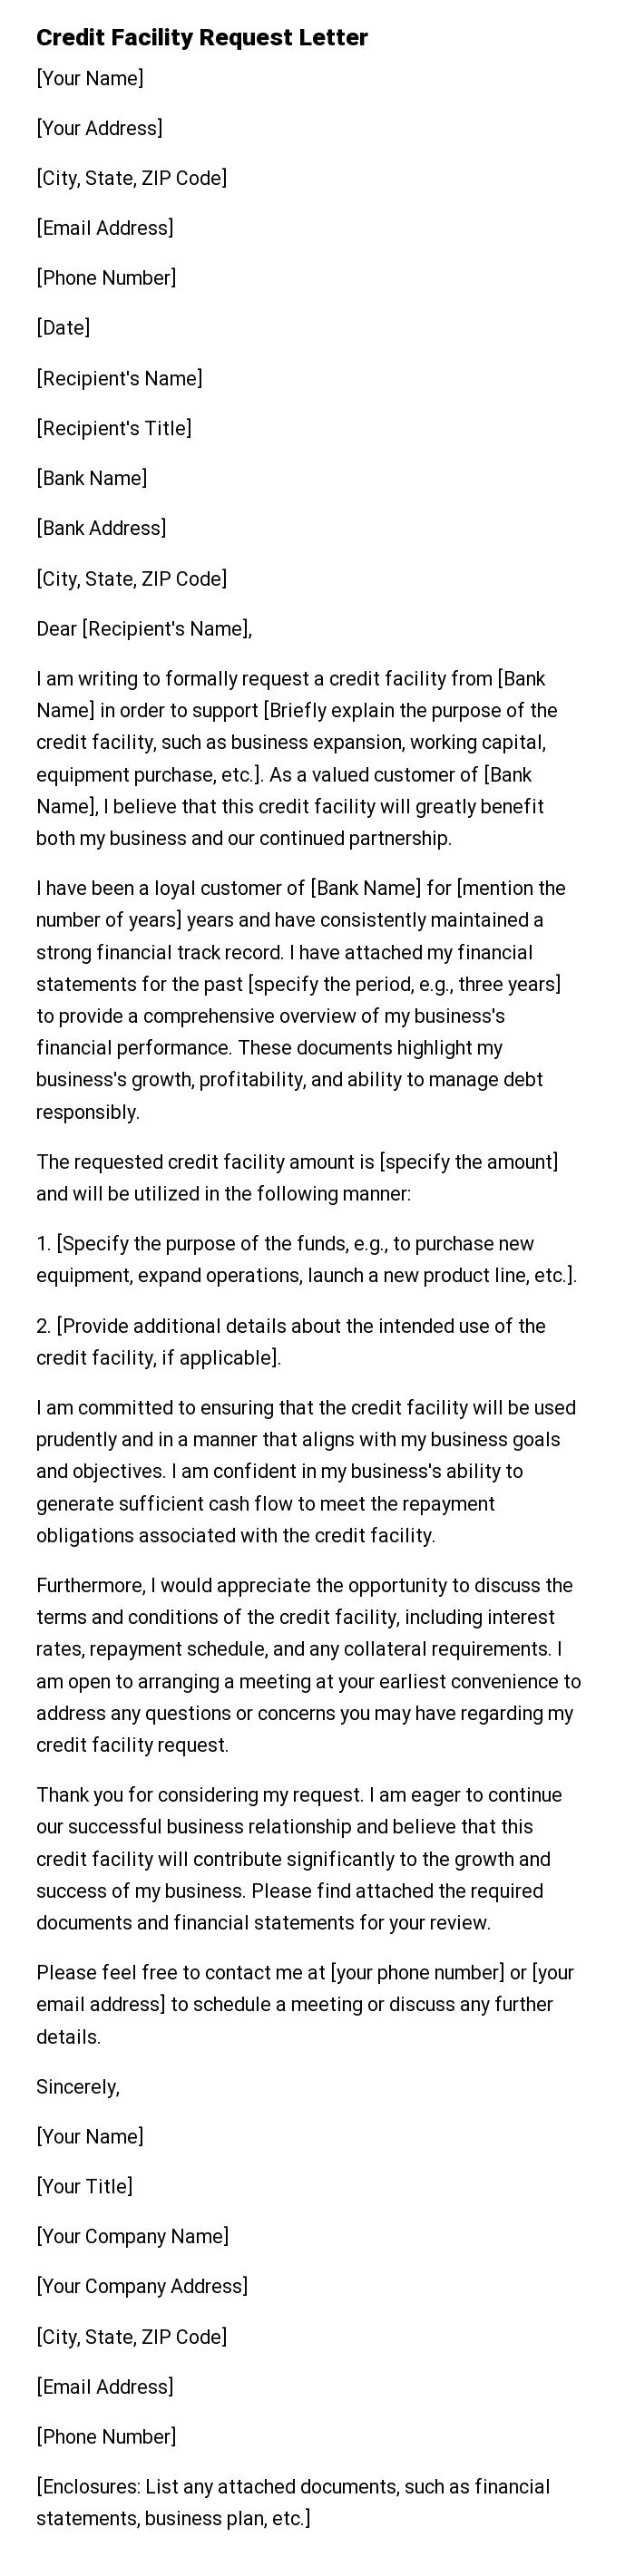 Credit Facility Request Letter